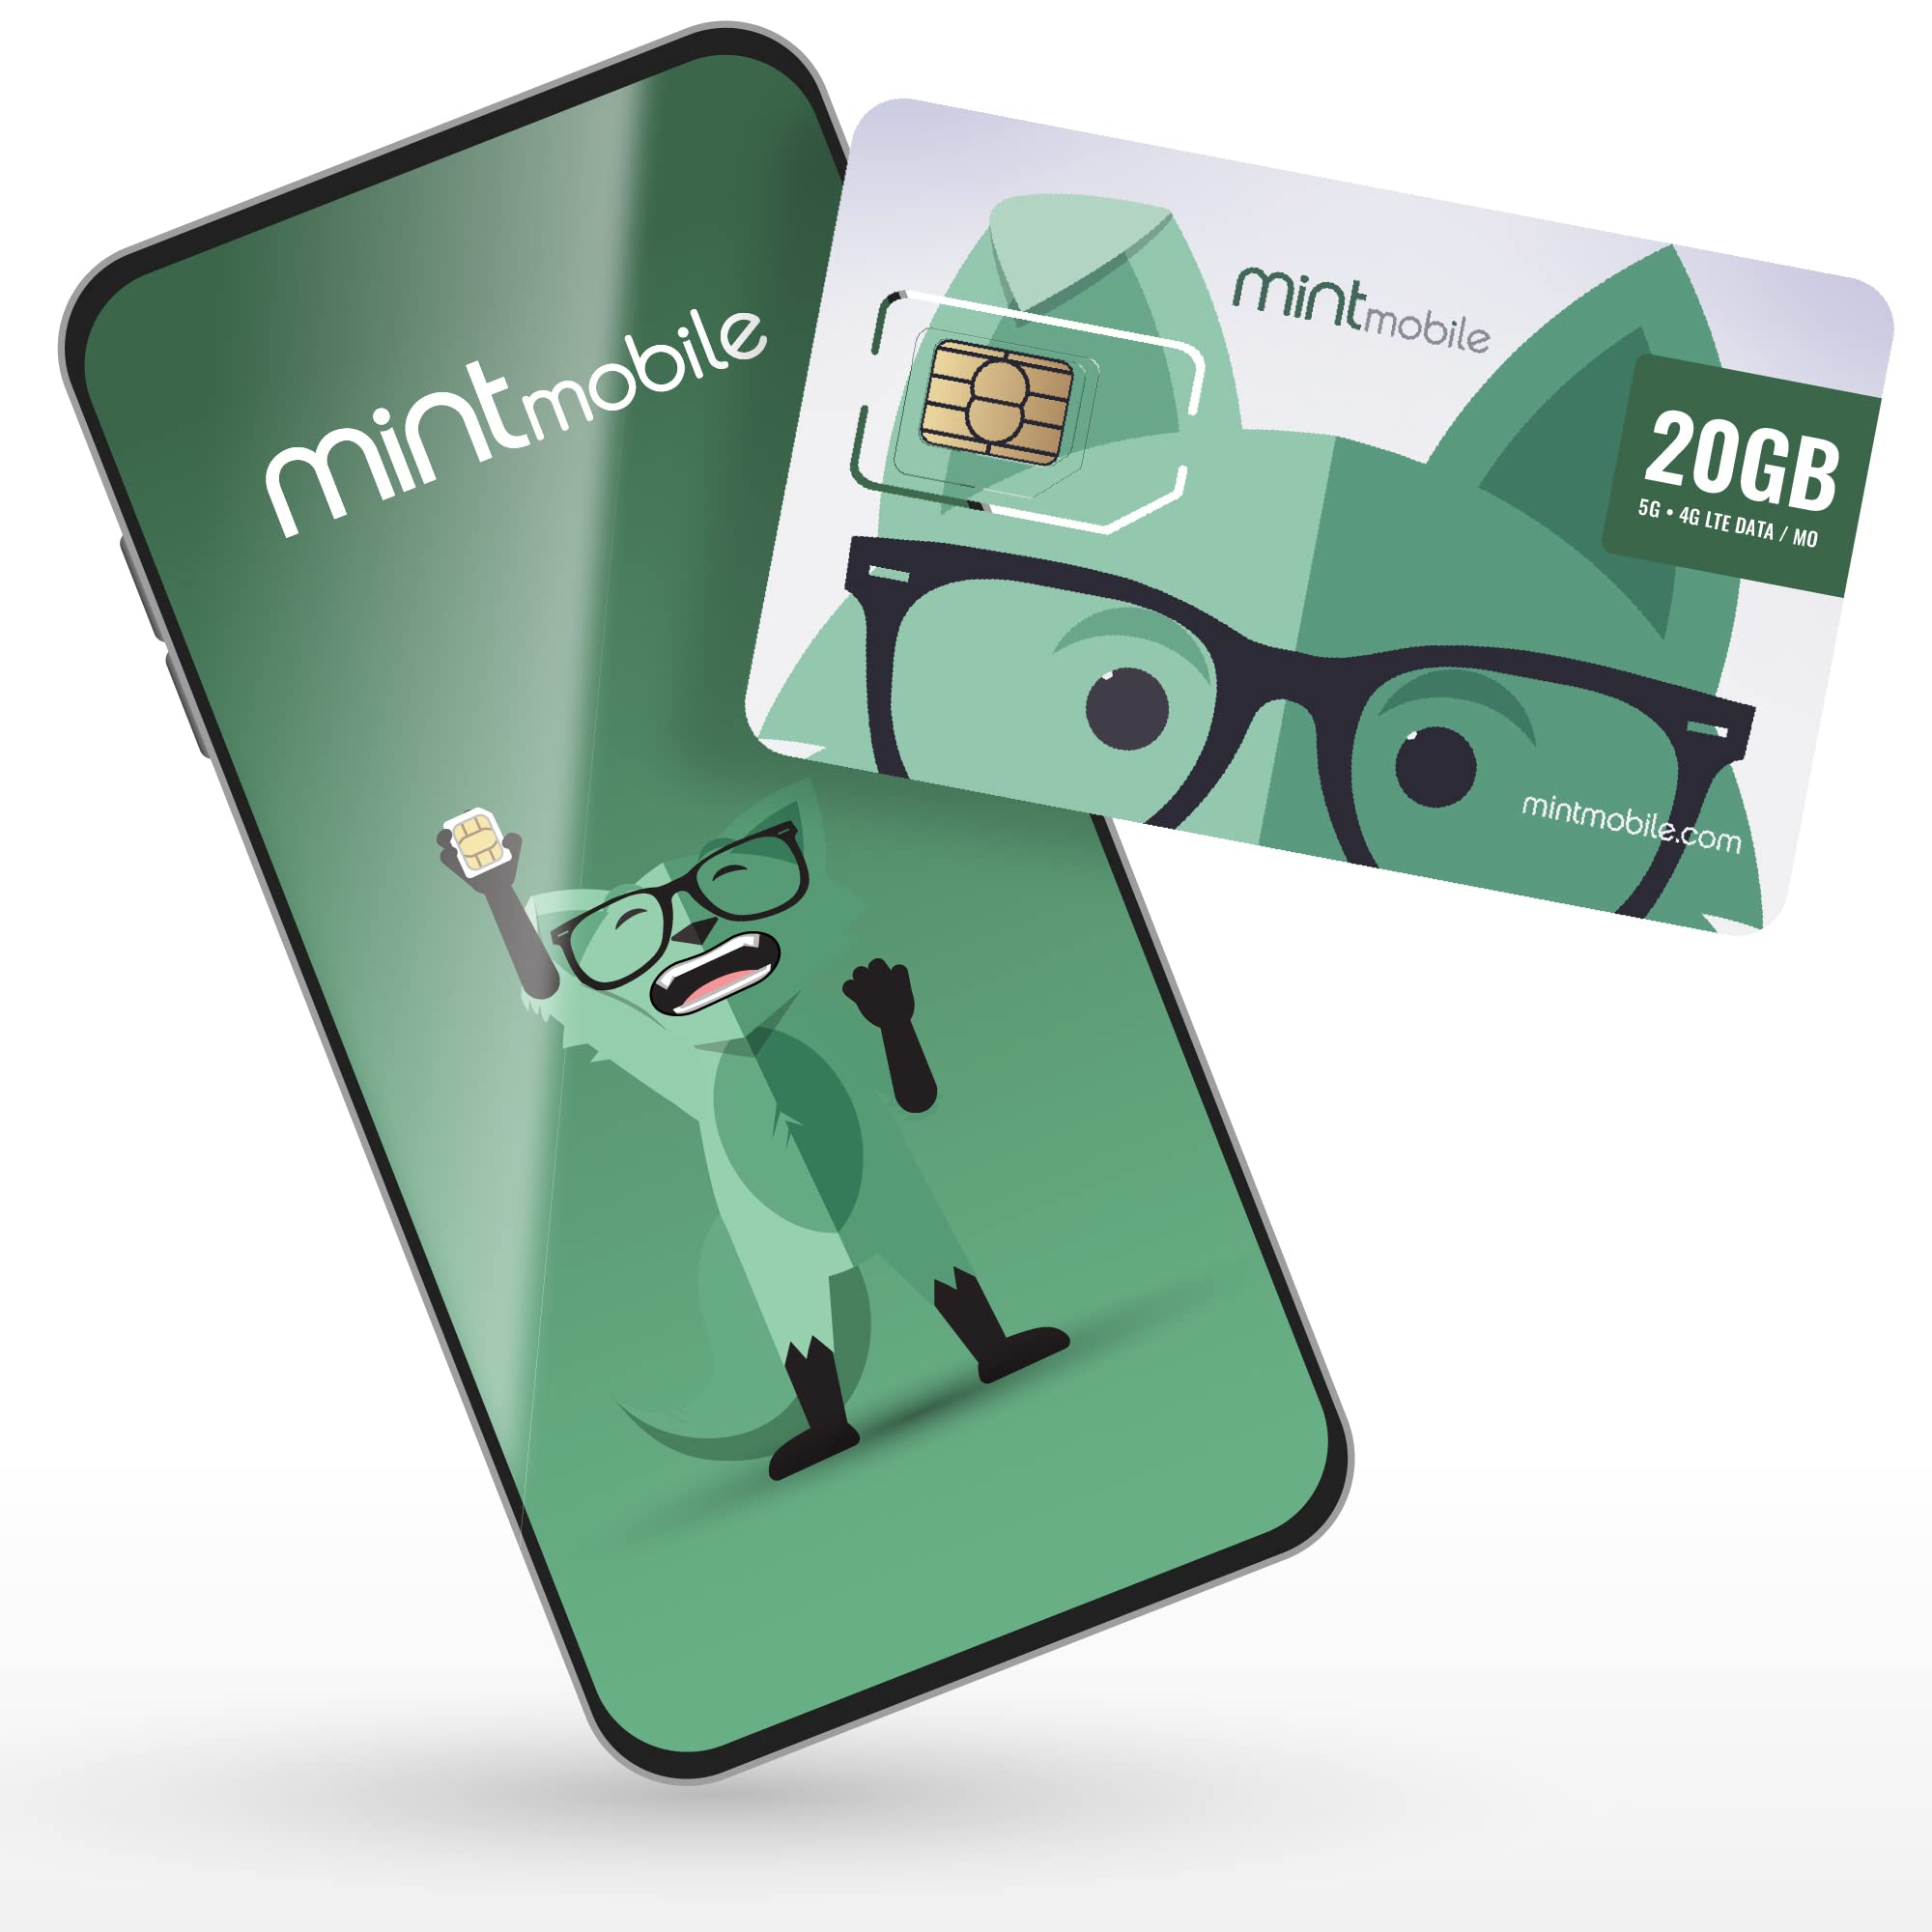 $25/mo. Mint Mobile Phone Plan with 20GB of 5G-4G LTE Data + Unlimited Talk & Text for 3 Months (3-in-1 SIM Card)